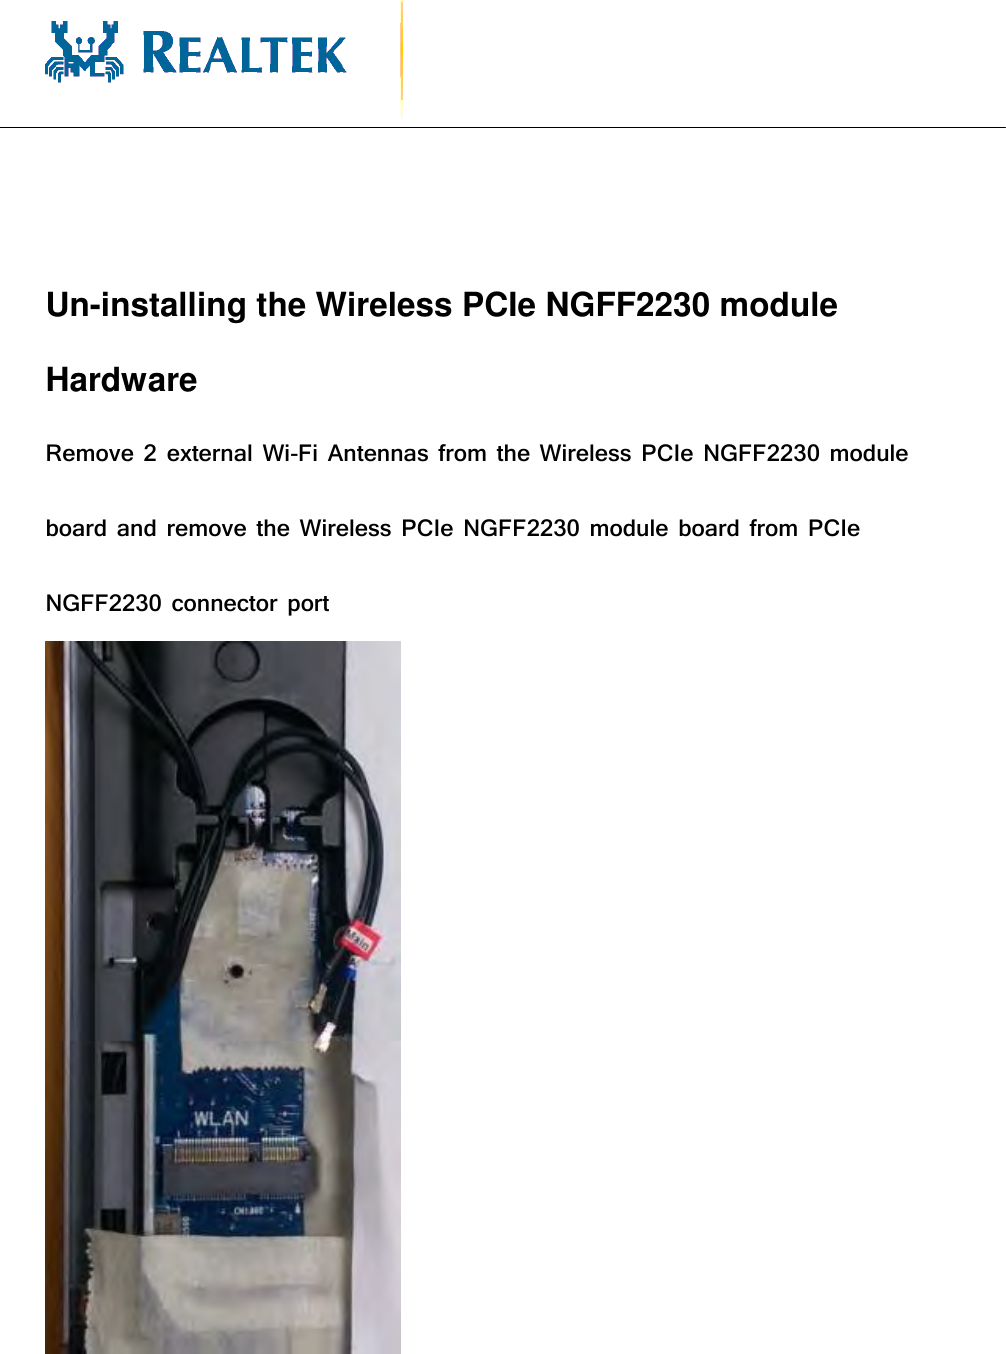                                                 Un-installing the Wireless PCIe NGFF2230 module Hardware   Remove 2 external Wi-Fi Antennas from the Wireless PCIe NGFF2230 module board and remove the Wireless PCIe NGFF2230 module board from PCIe NGFF2230 connector port      